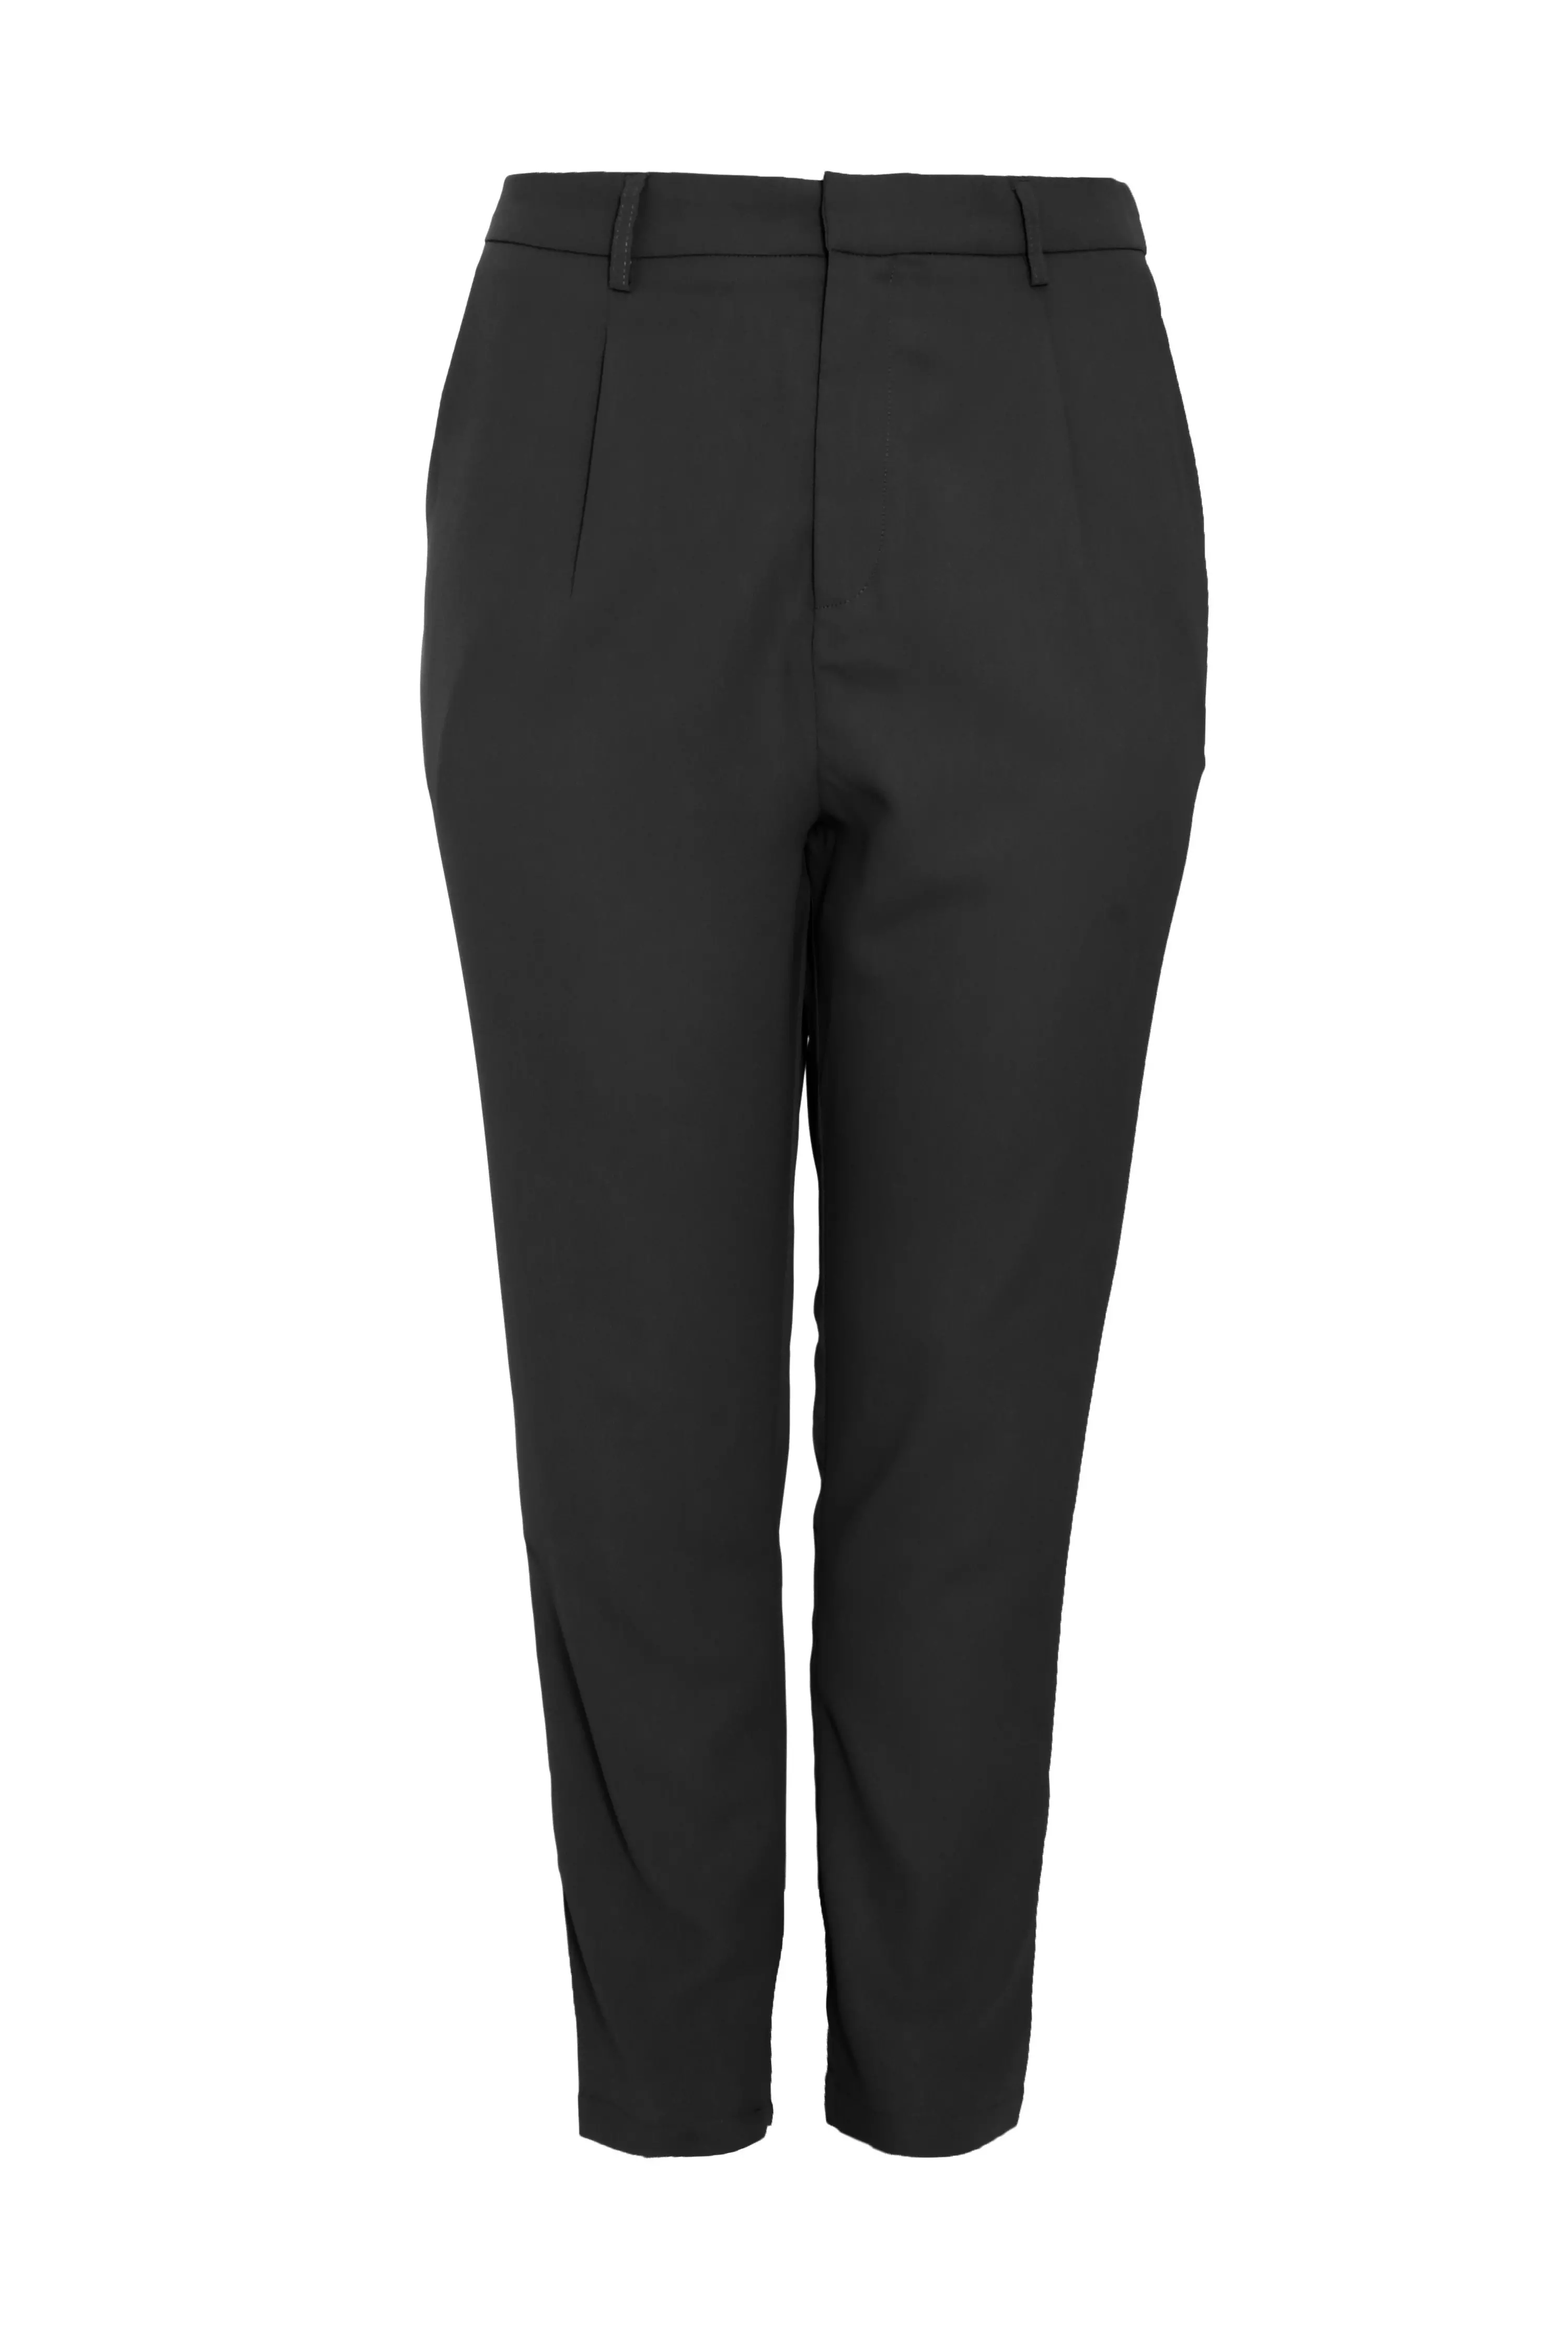 Curve Black Tailored Trousers - QUIZ Clothing